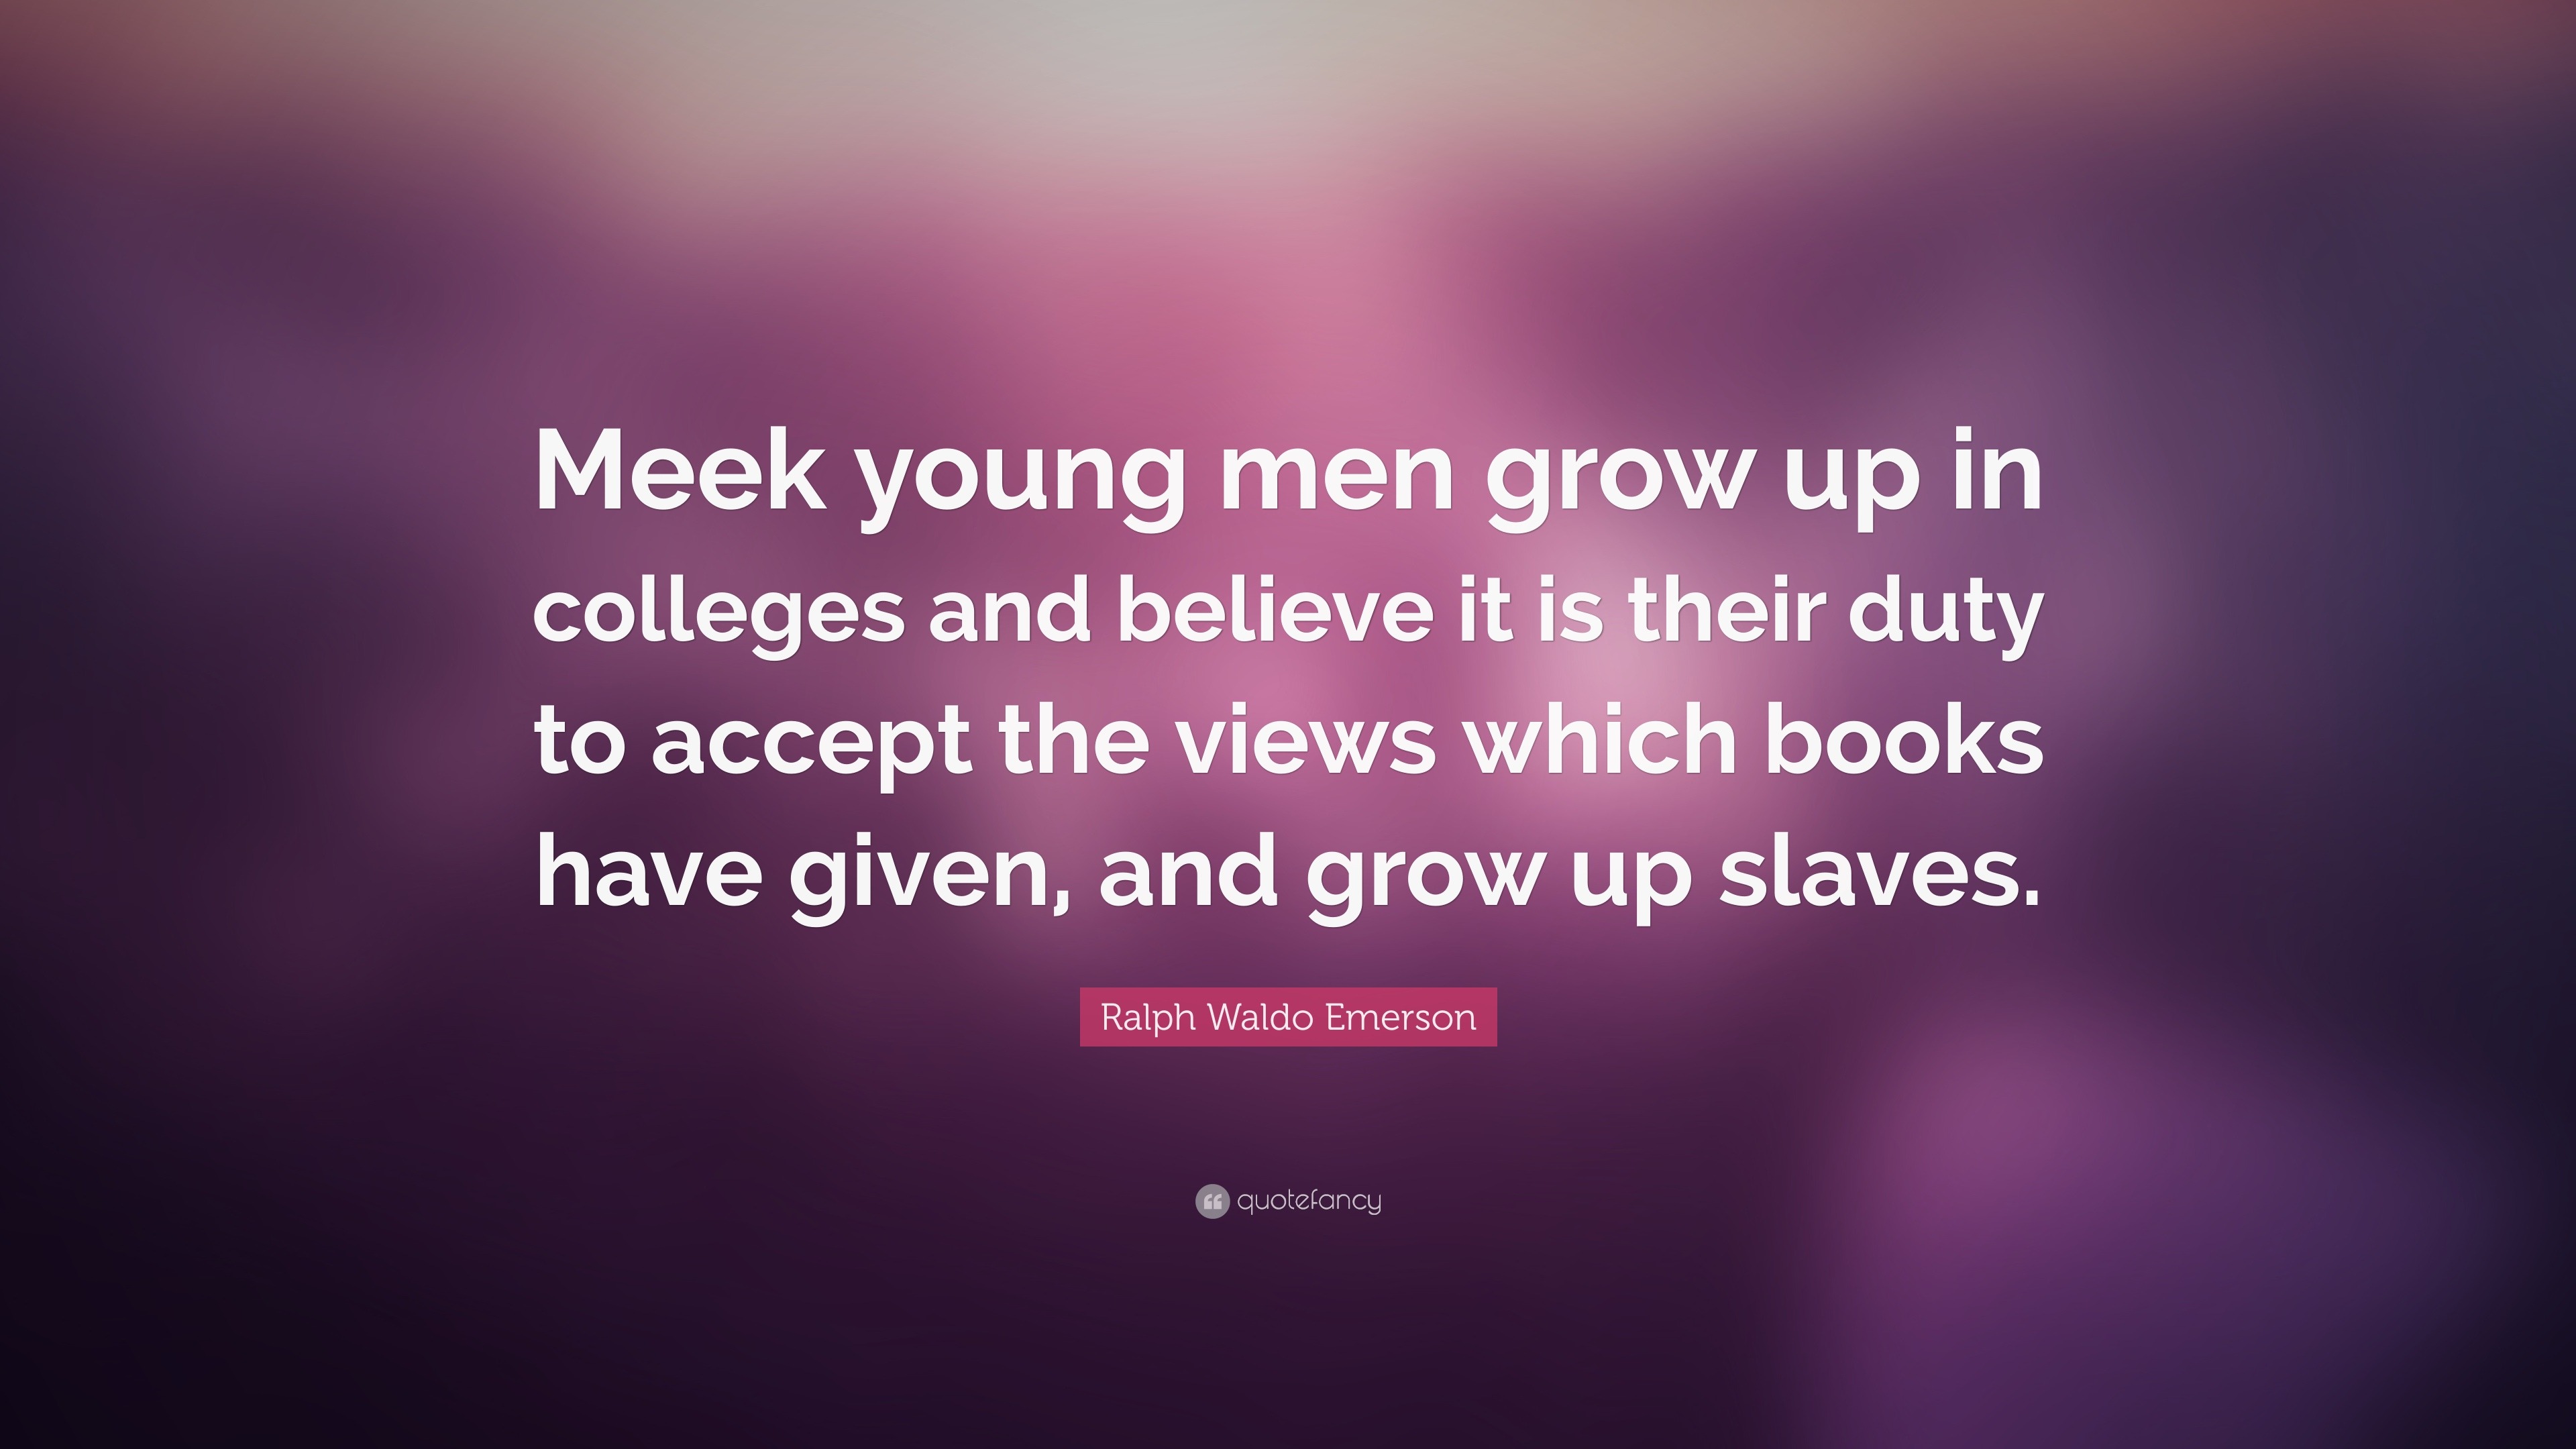 growing up quotes about men